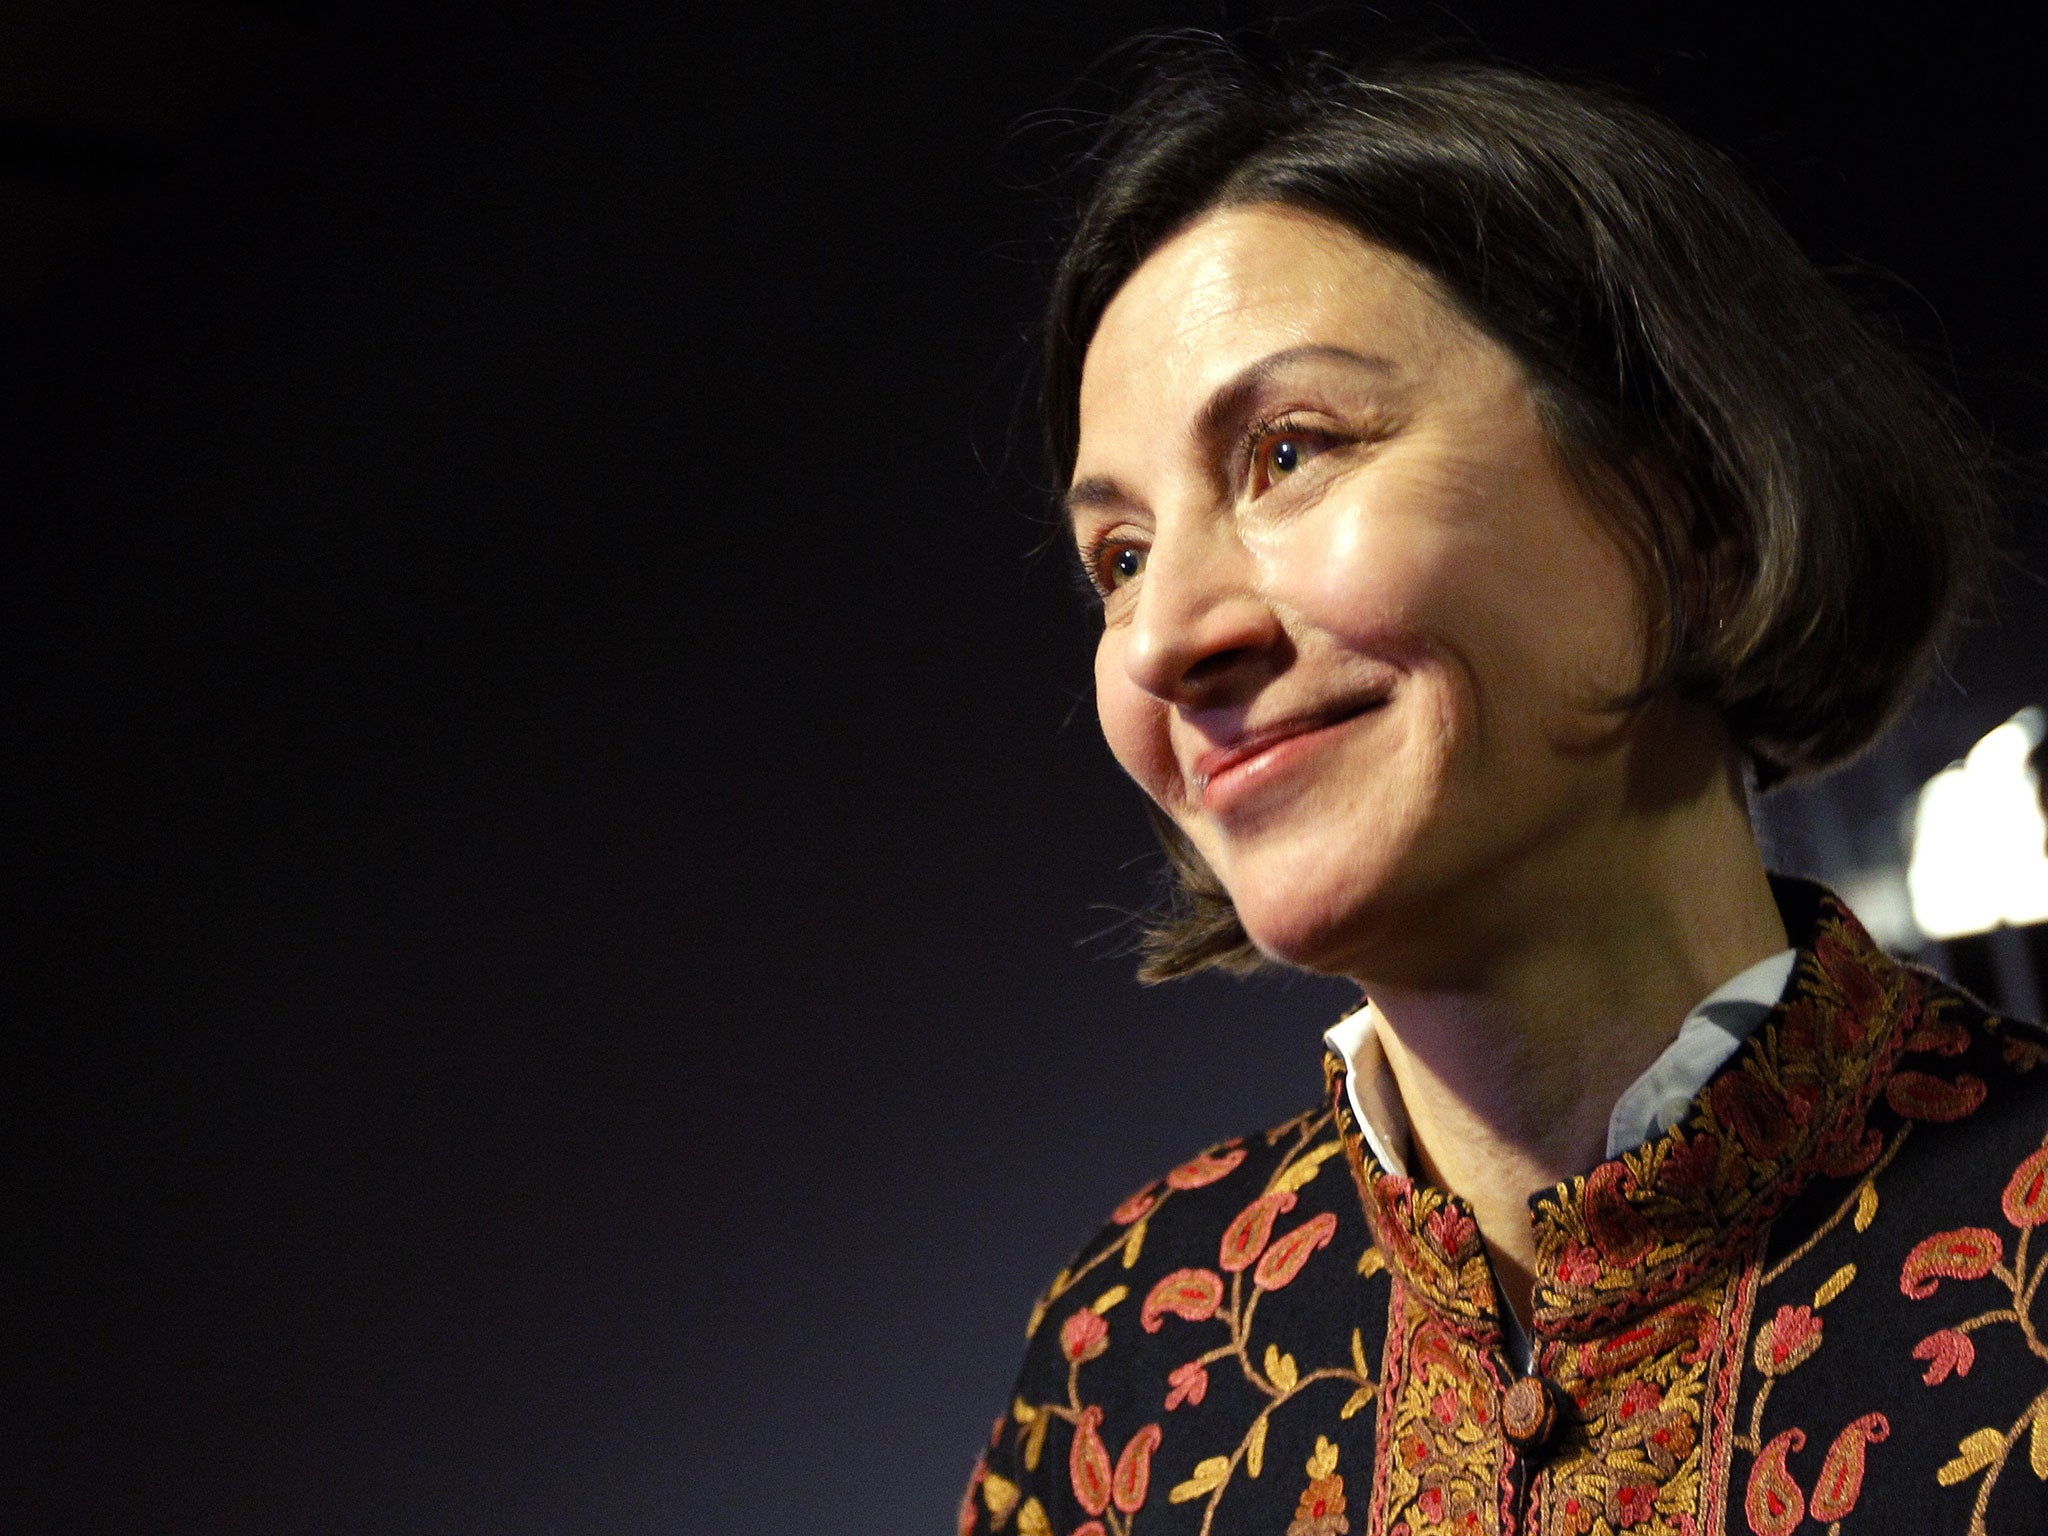 Donna Tartt's third, highly anticipated novel is called The Goldfinch